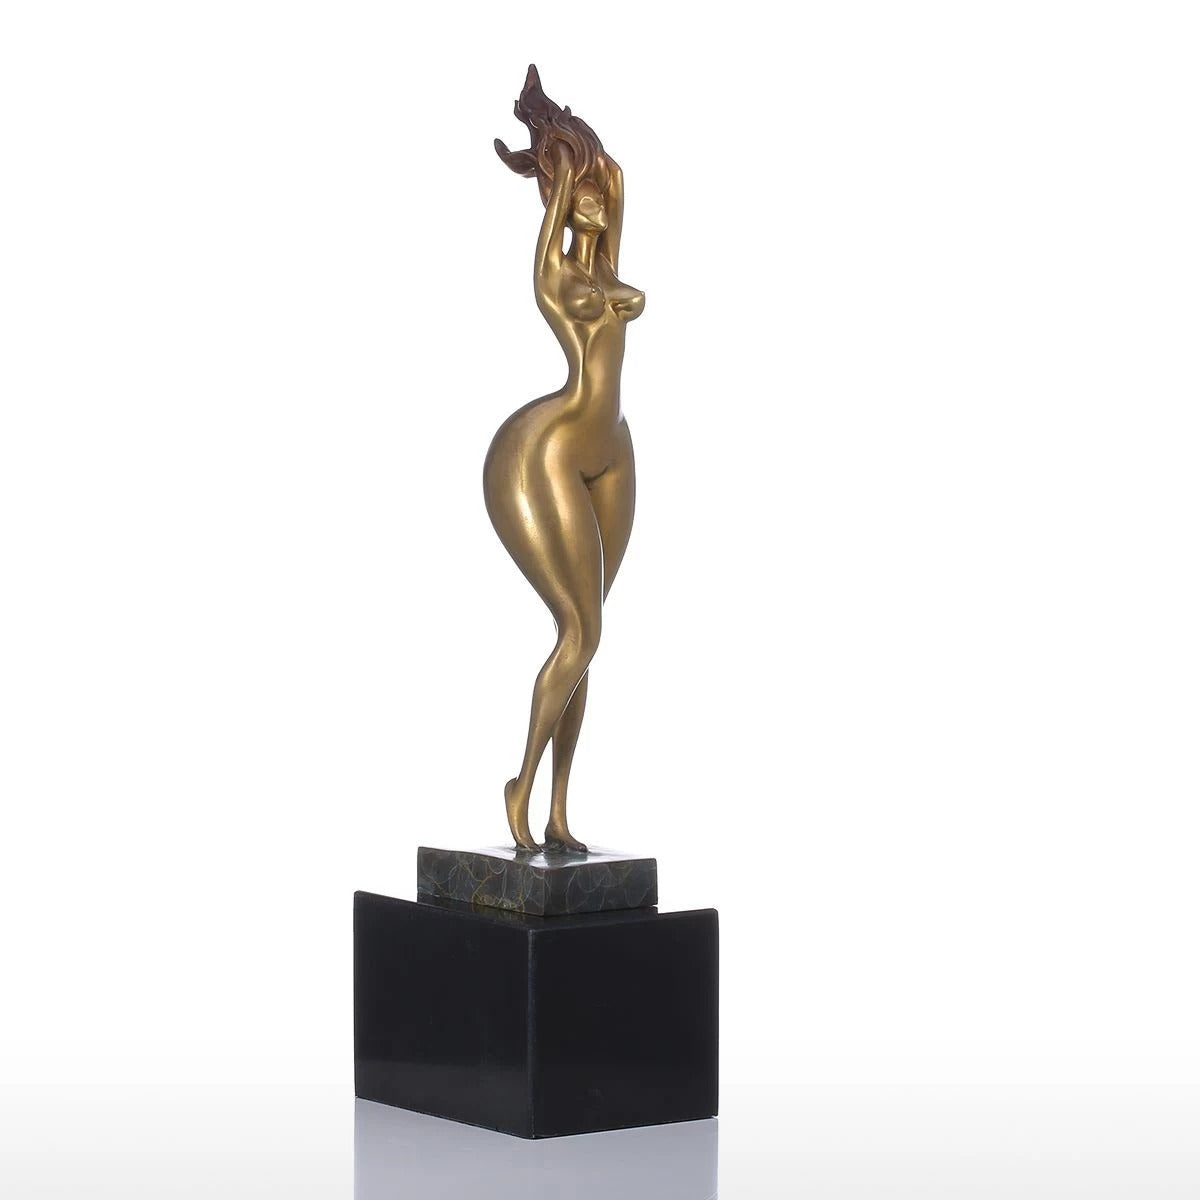 Aesthetic Female and Woman Body Statue Figurine